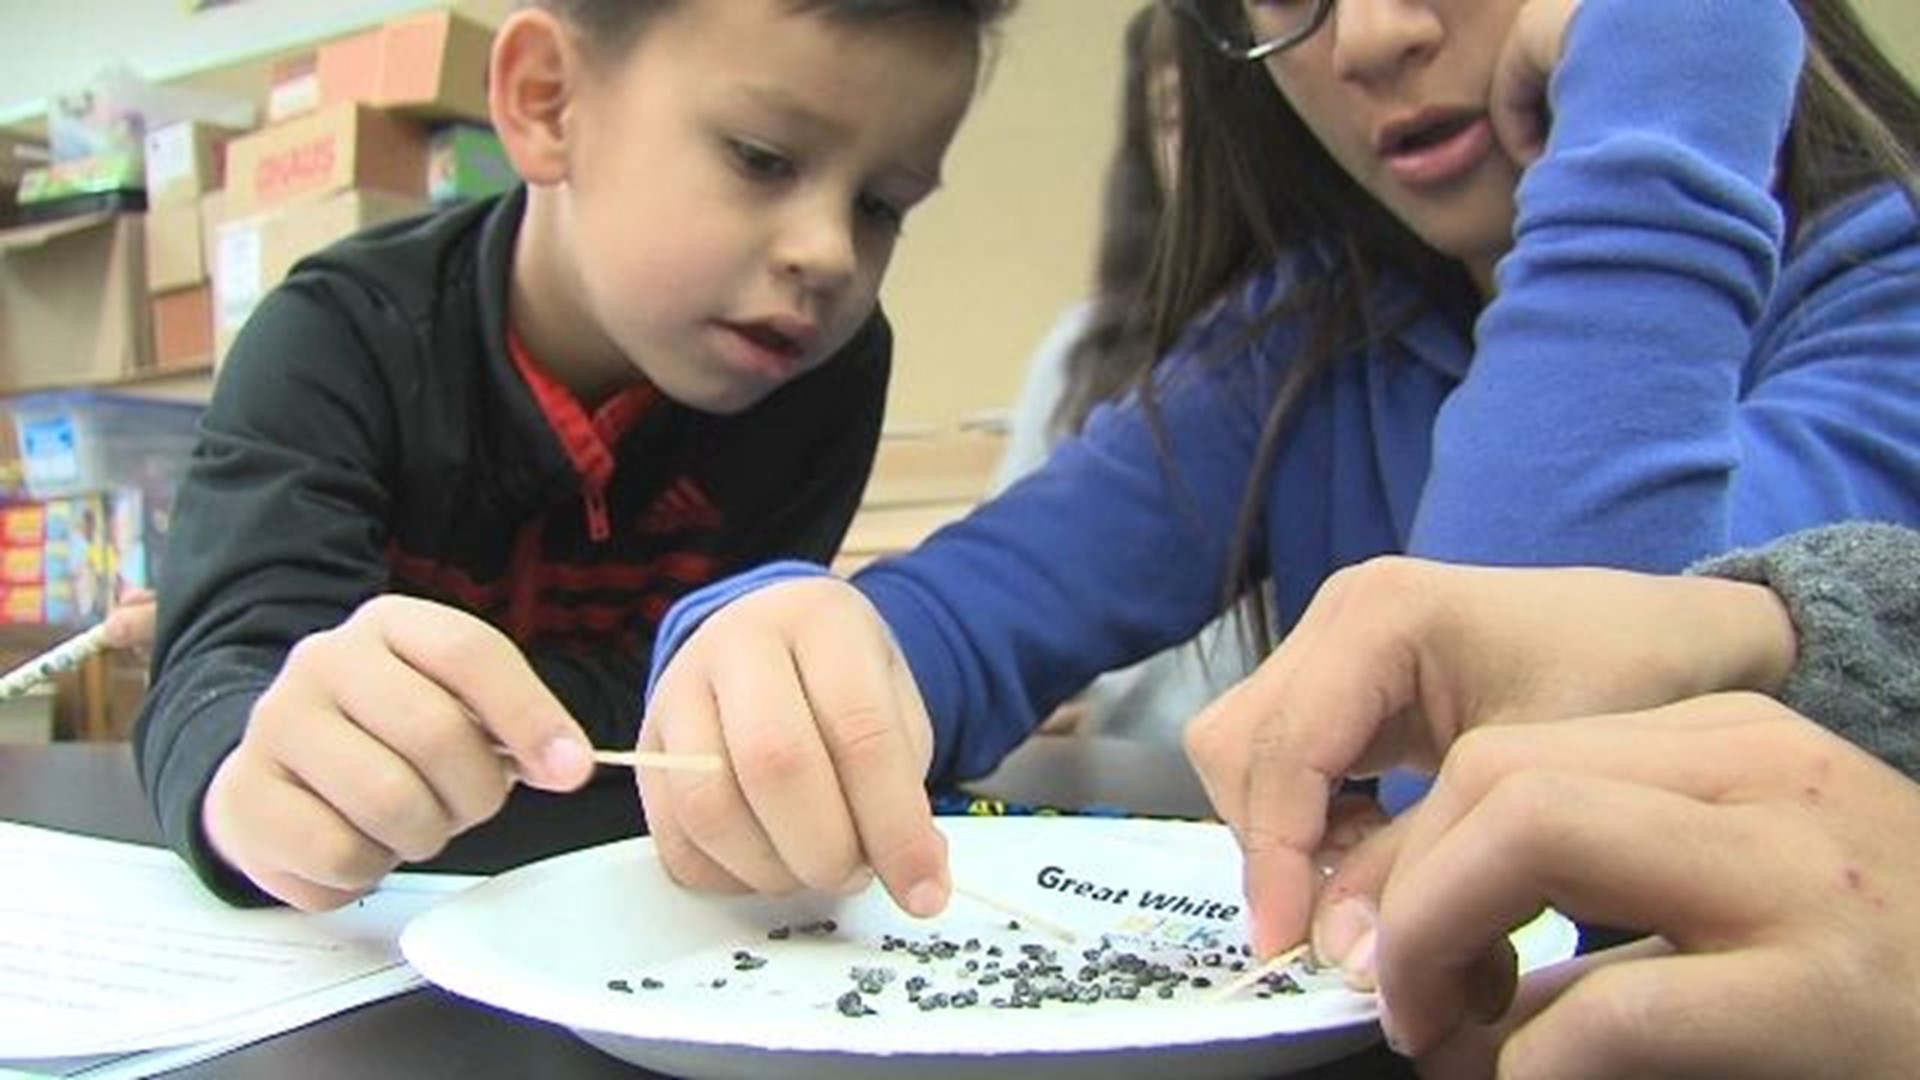 SharkFinder allows kids to be scientists and explore fossils in the classroom